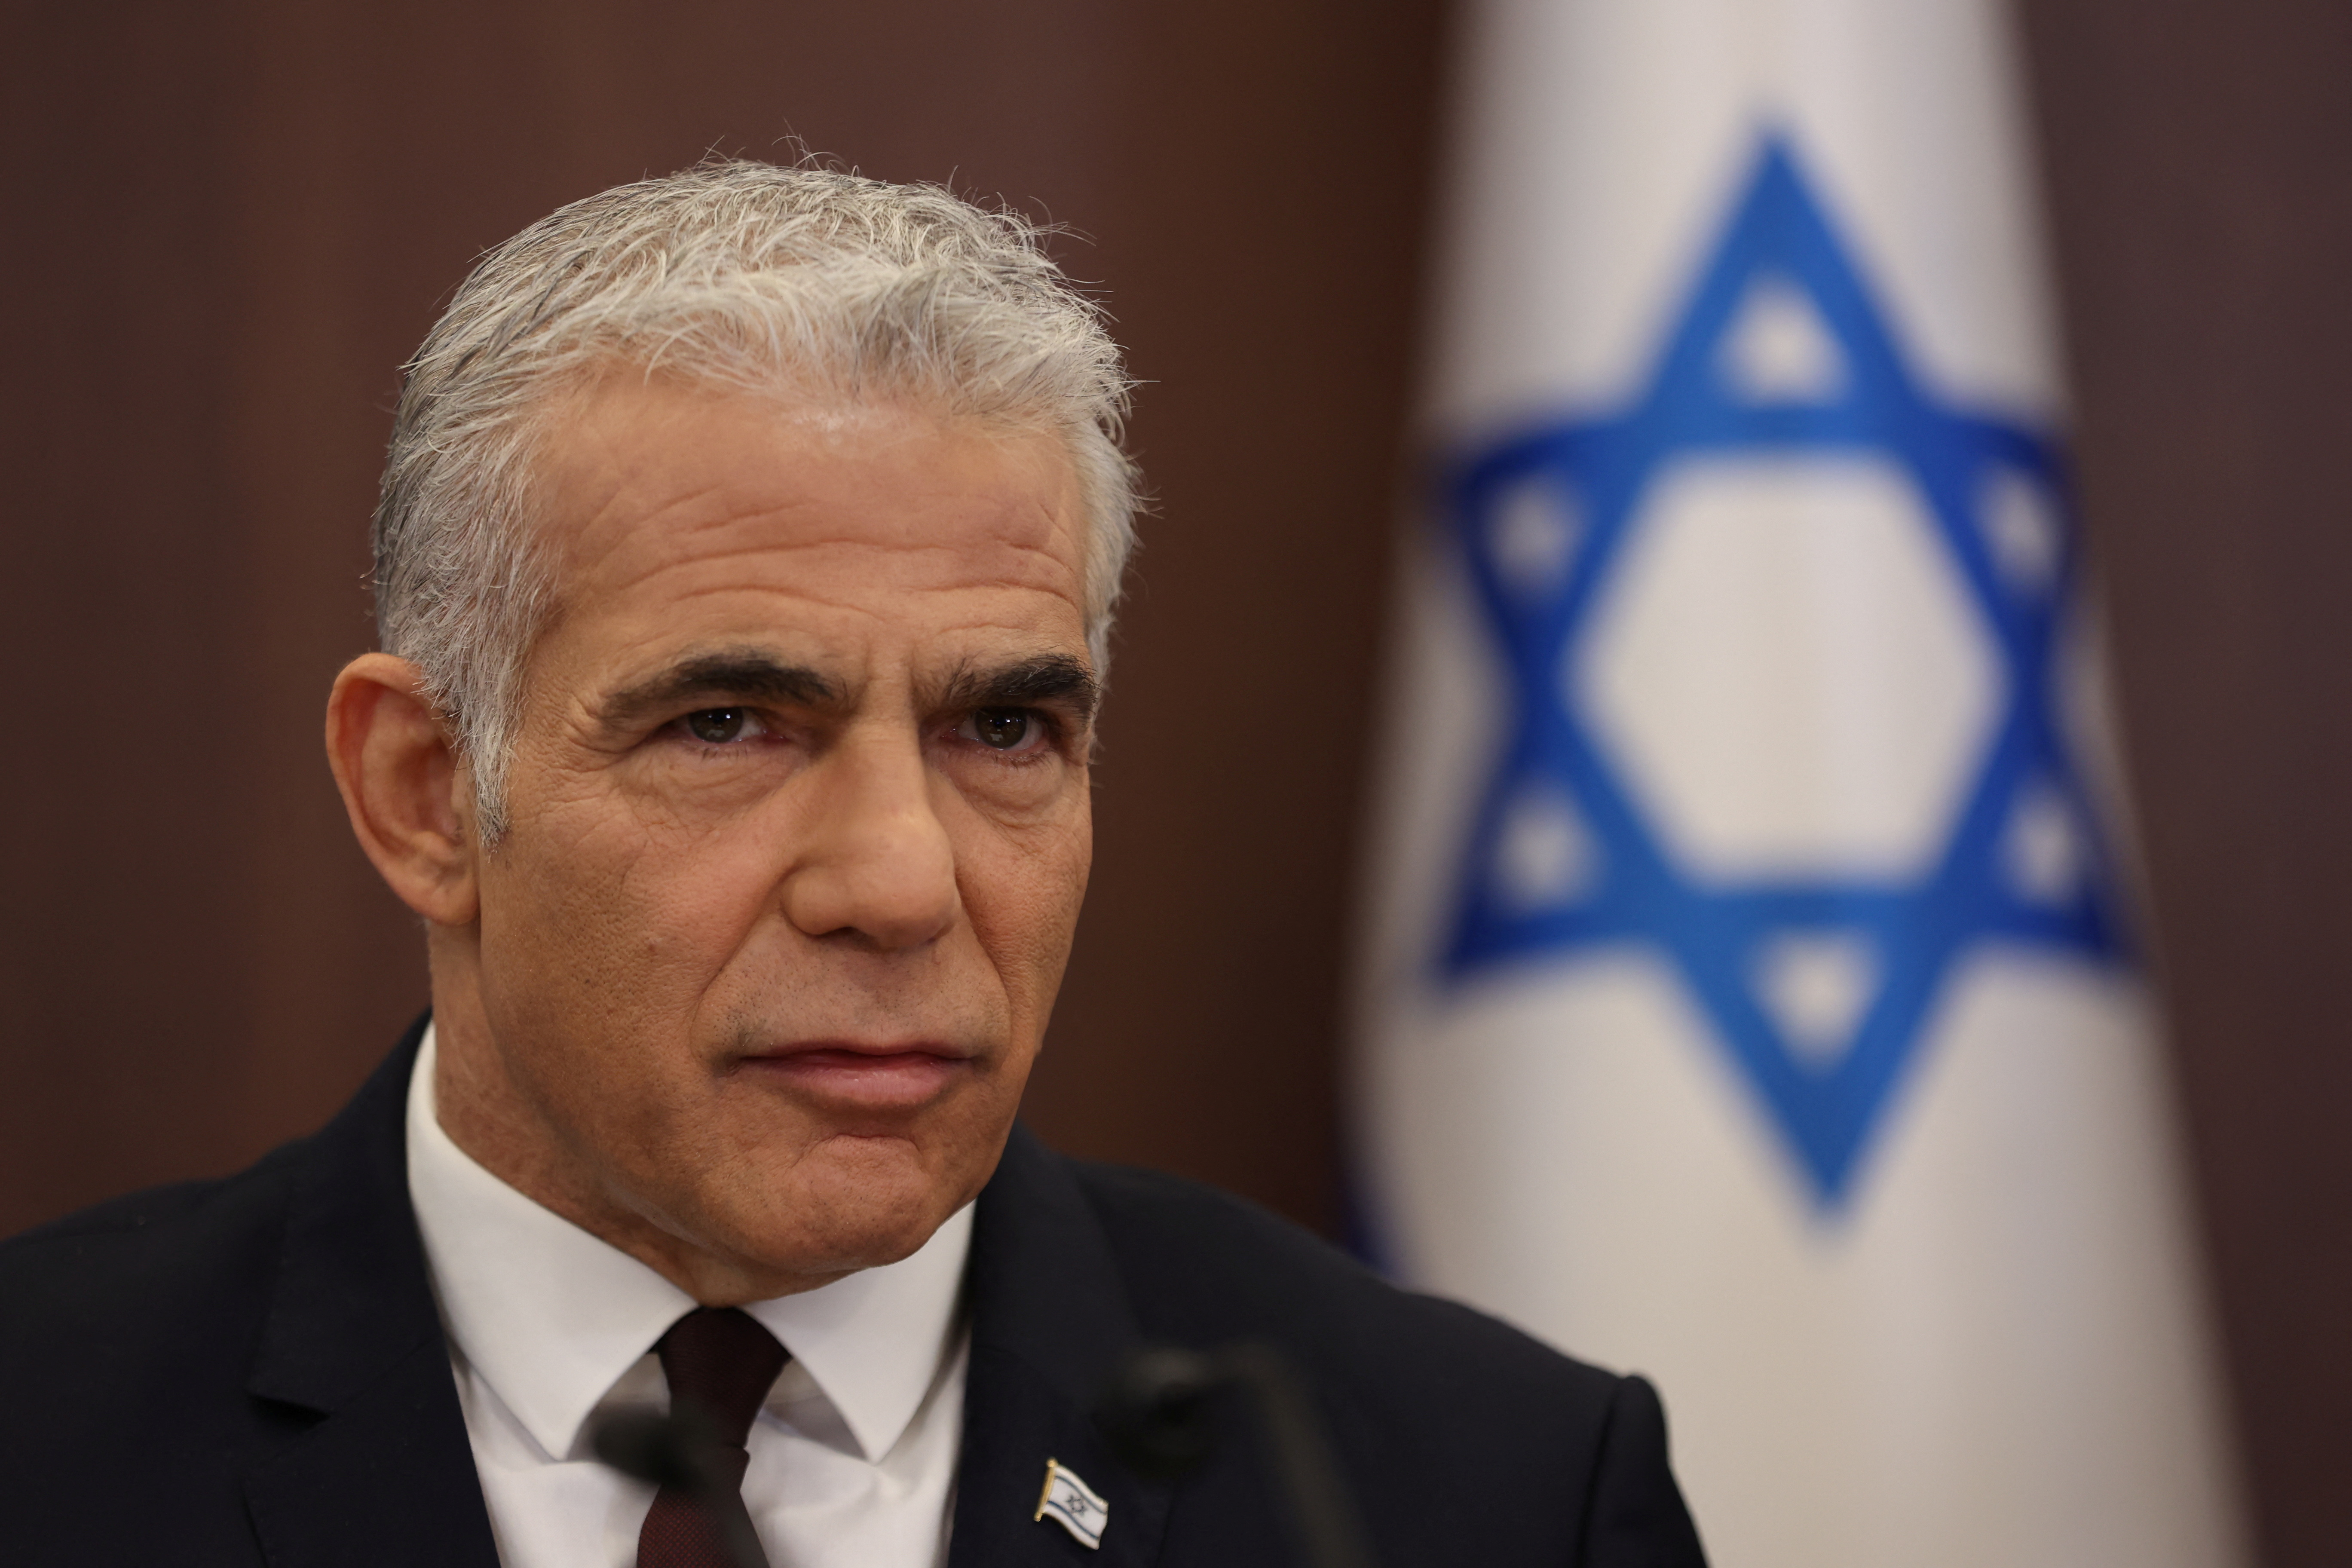 Israeli Prime Minister Yair Lapid attends a cabinet meeting at the prime minister's office in Jerusalem, on October 23, 2022. Abir Sultan/Pool via REUTERS